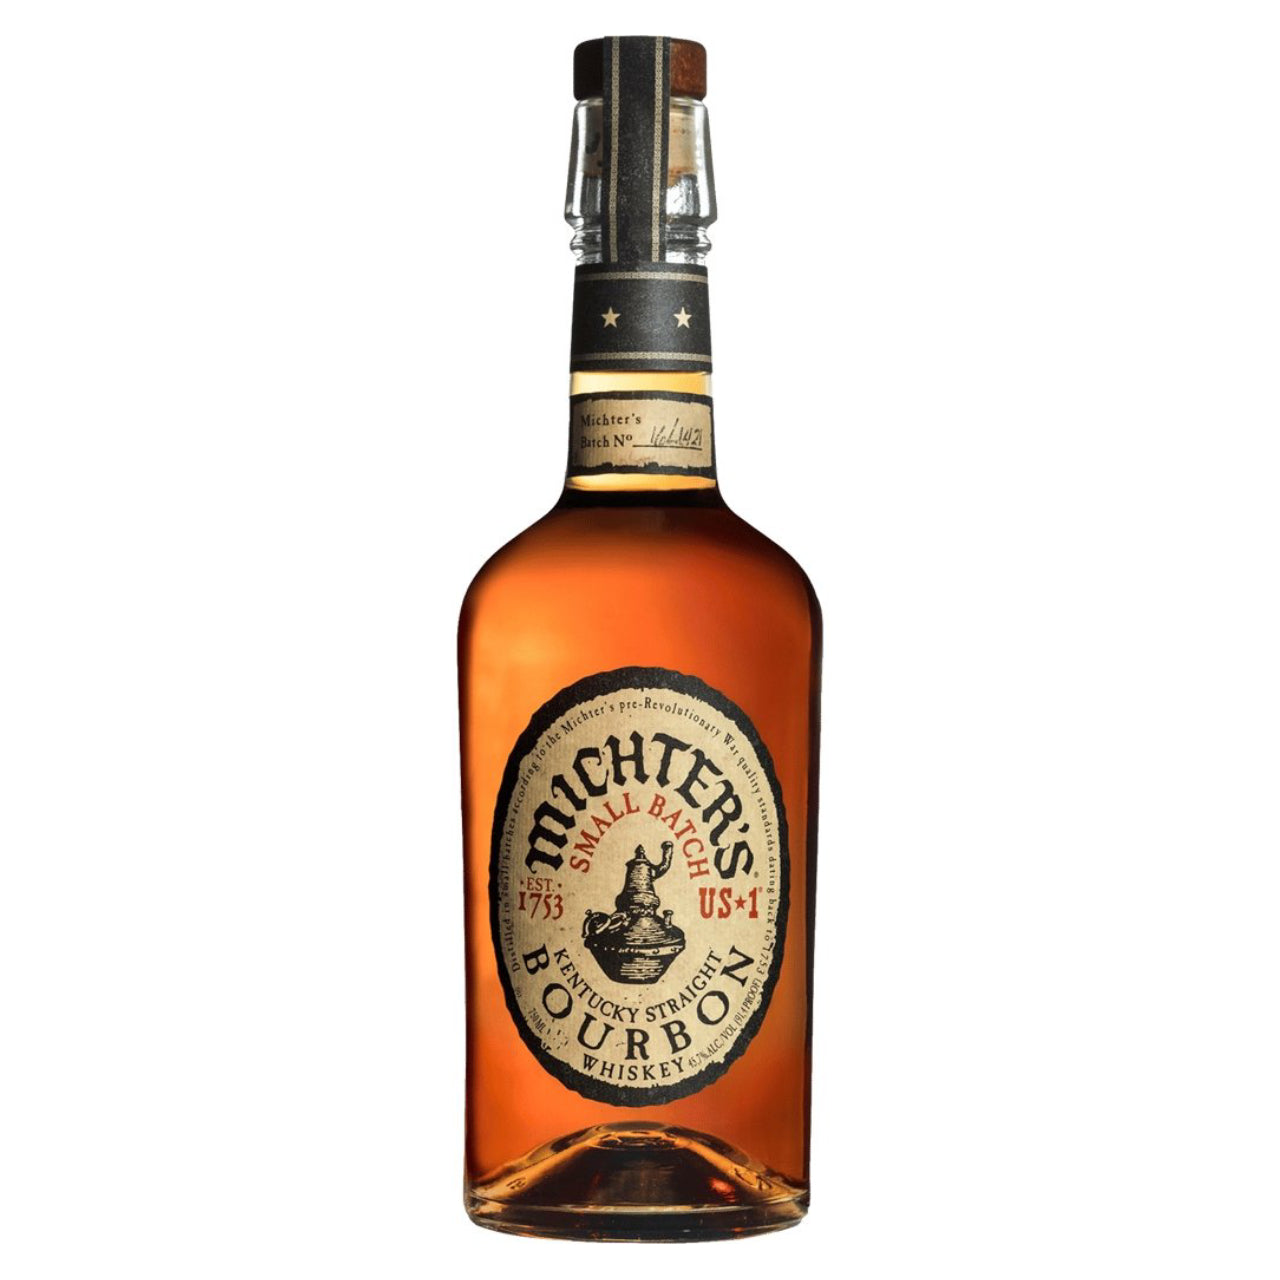 Michter's US 1 American Whiskey - Whisky - Liquor Wine Cave